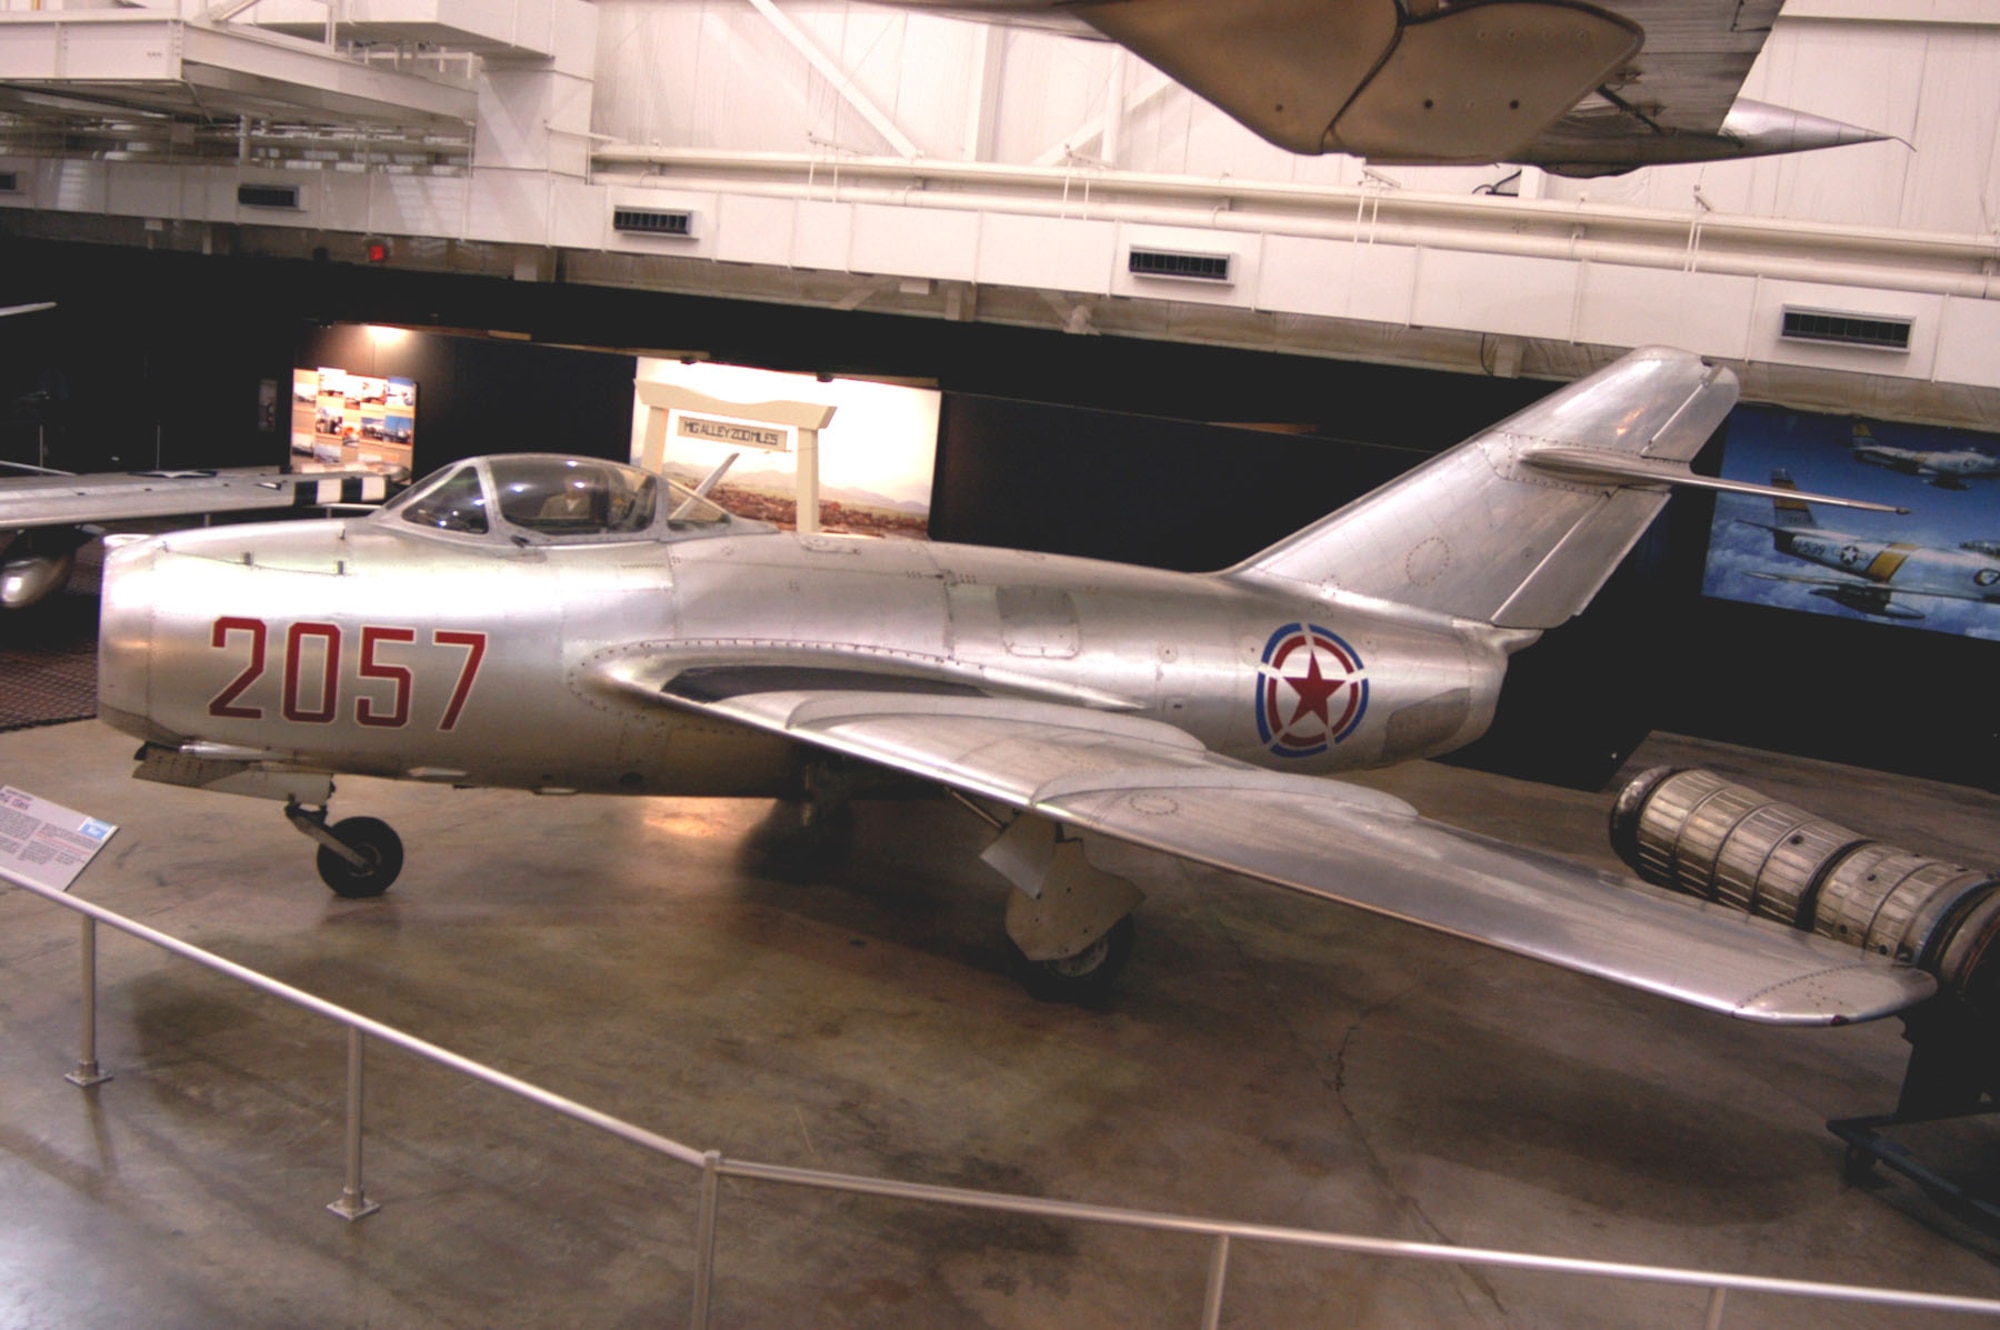 DAYTON, Ohio -- Mikoyan-Gurevich MiG-15 in the Korean War Gallery at the National Museum of the United States Air Force. (U.S. Air Force photo)